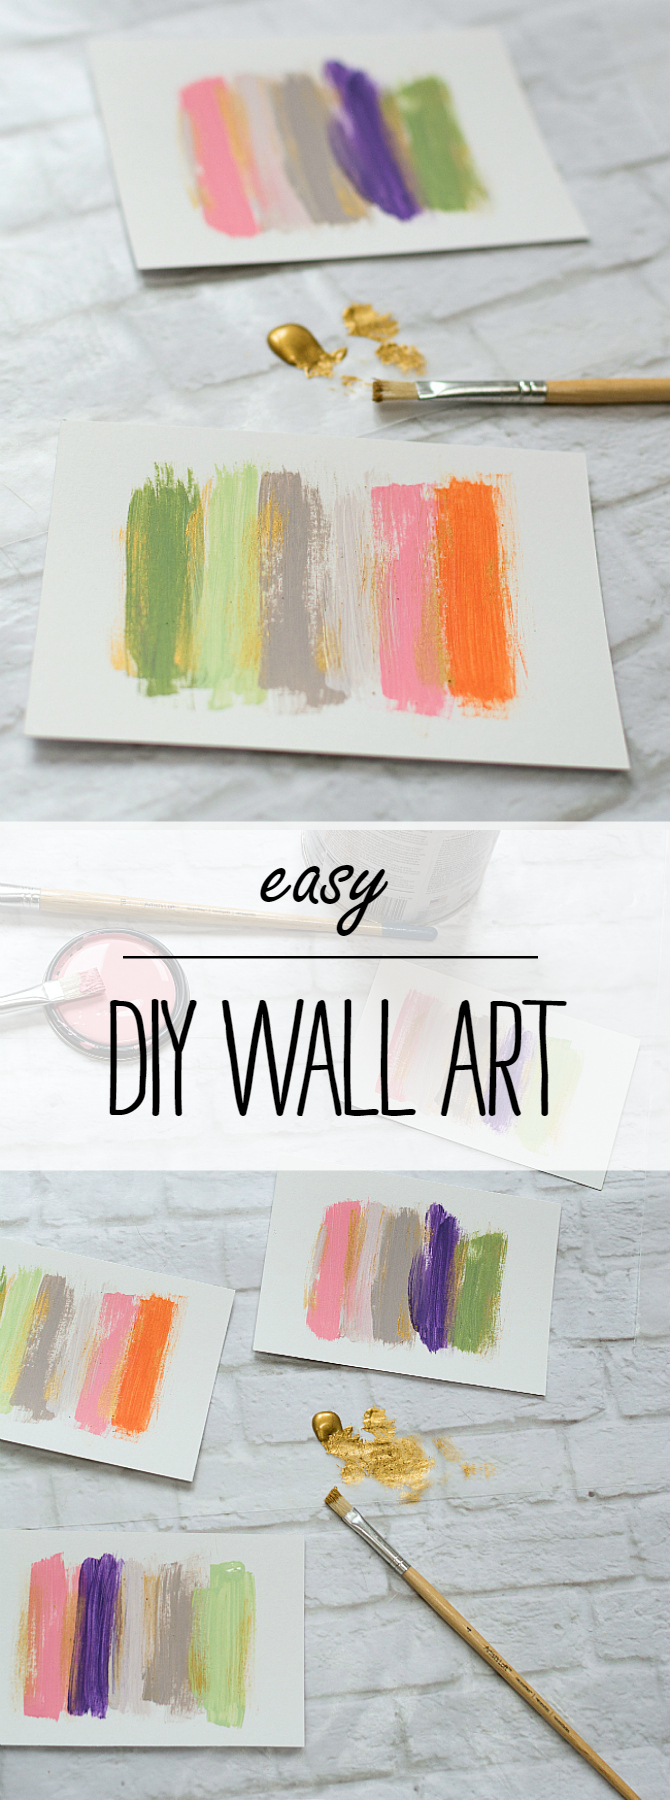 How To Make Easy DIY Wall Art with Paint